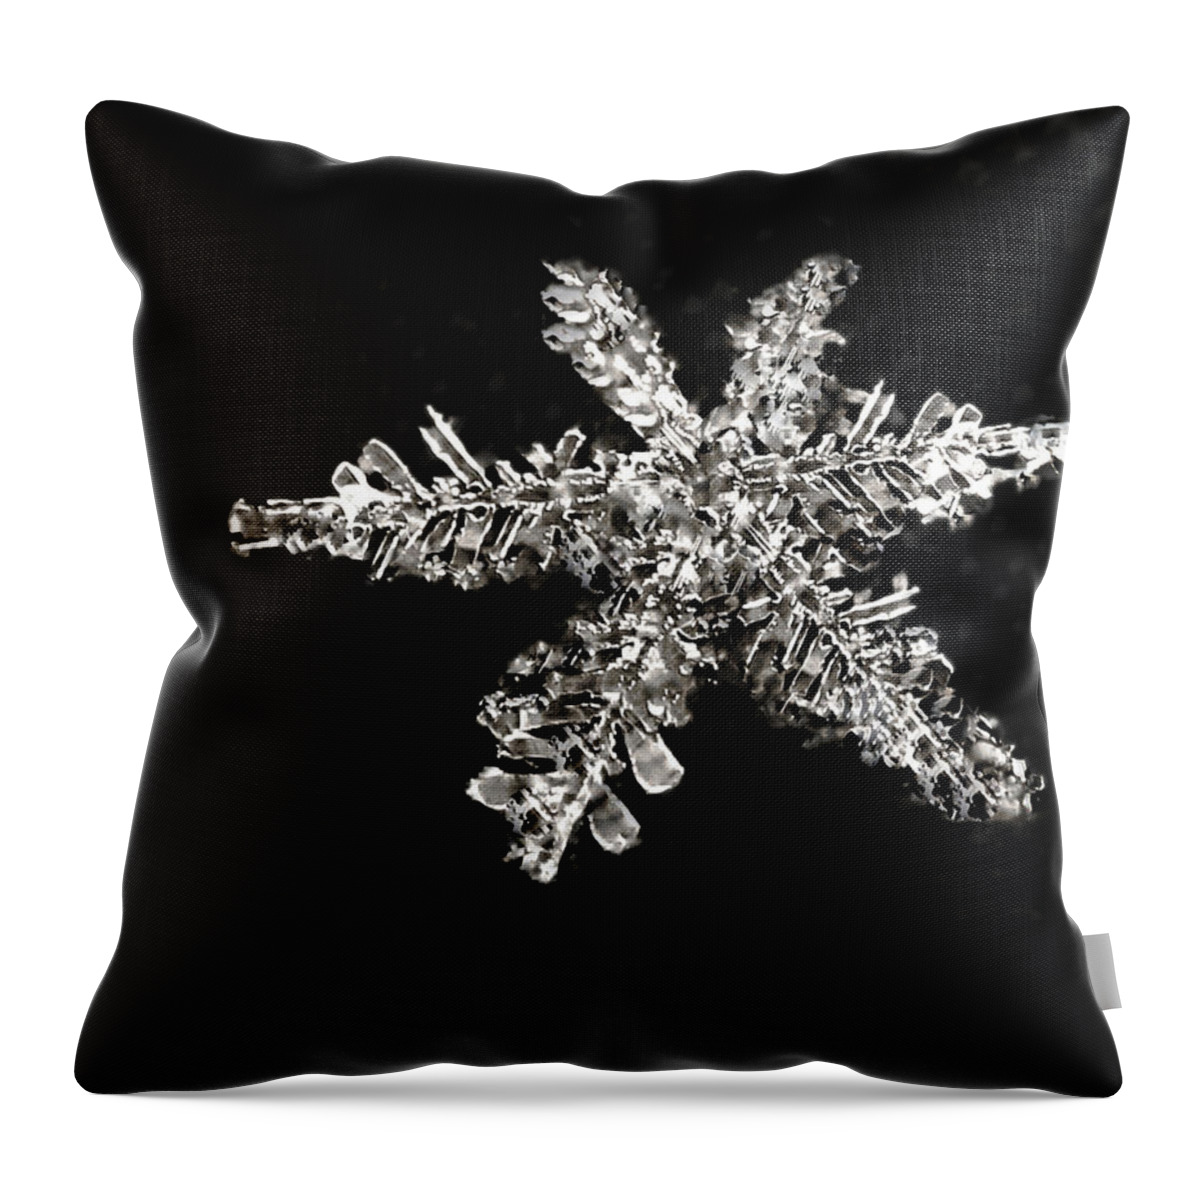 Ice Crystals Throw Pillow featuring the photograph Snowflake by Suzanne Stout